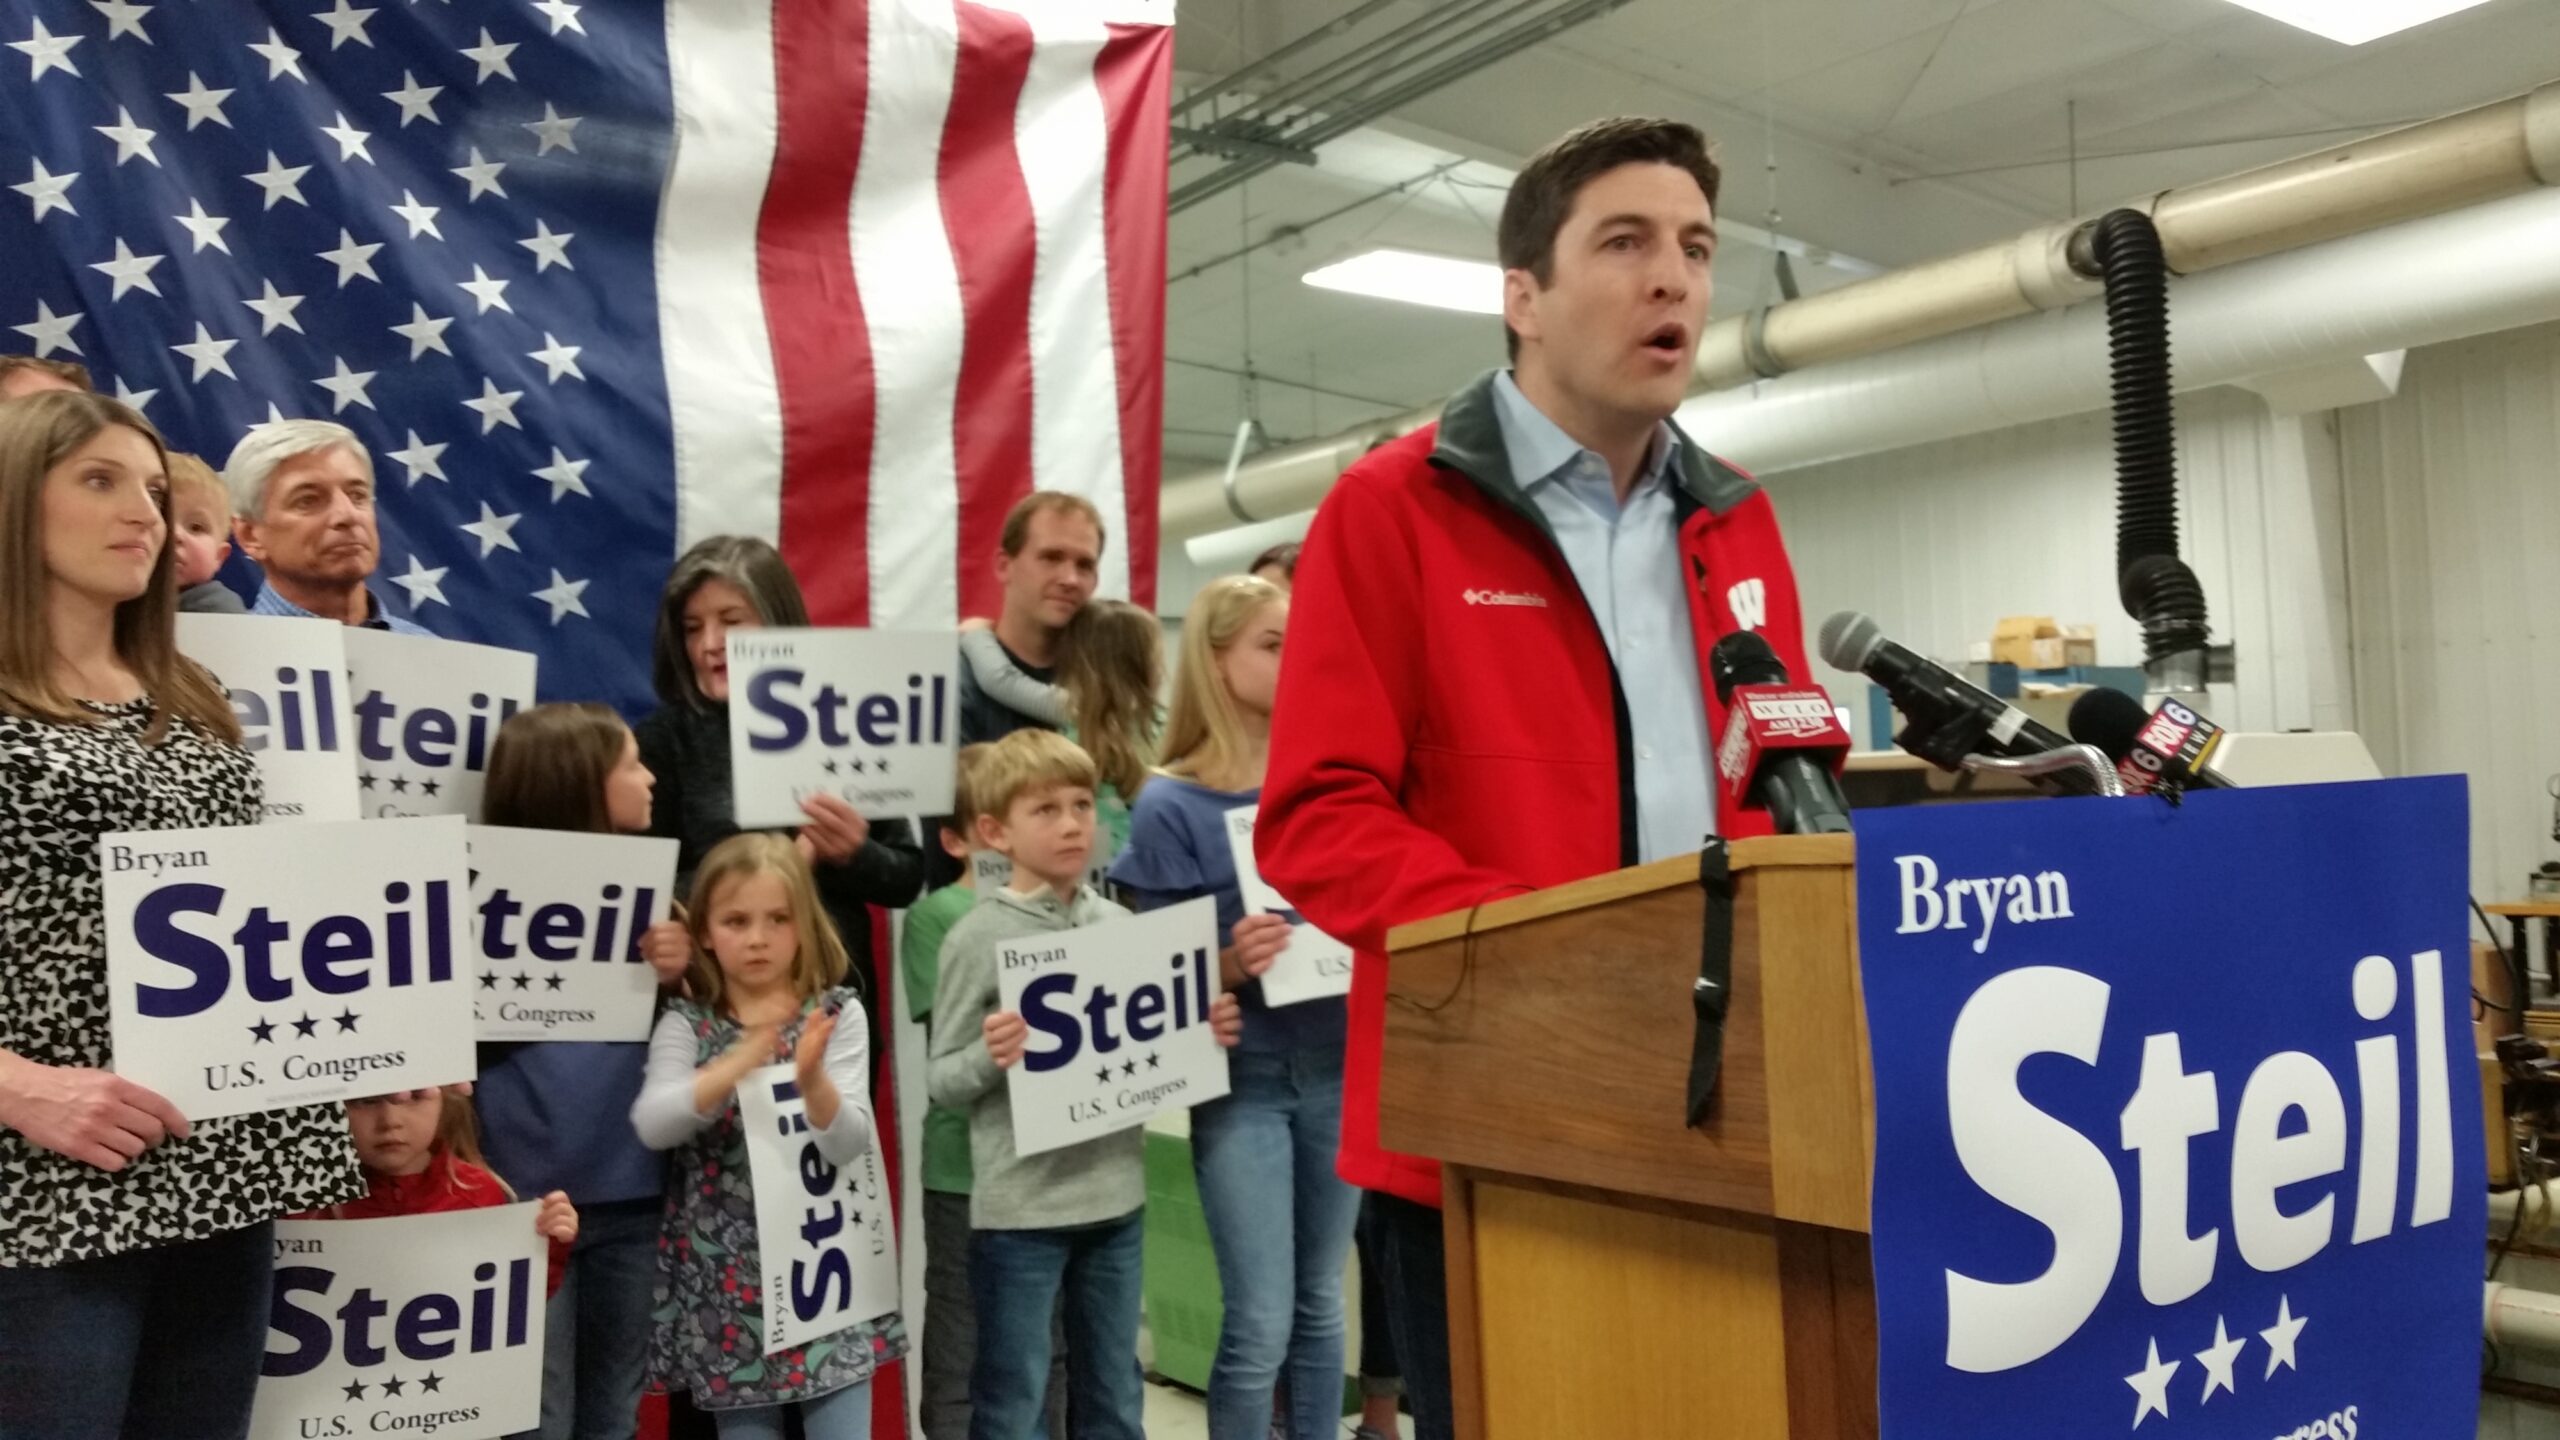 Republican Bryan Steil To Replace Paul Ryan In 1st Congressional District